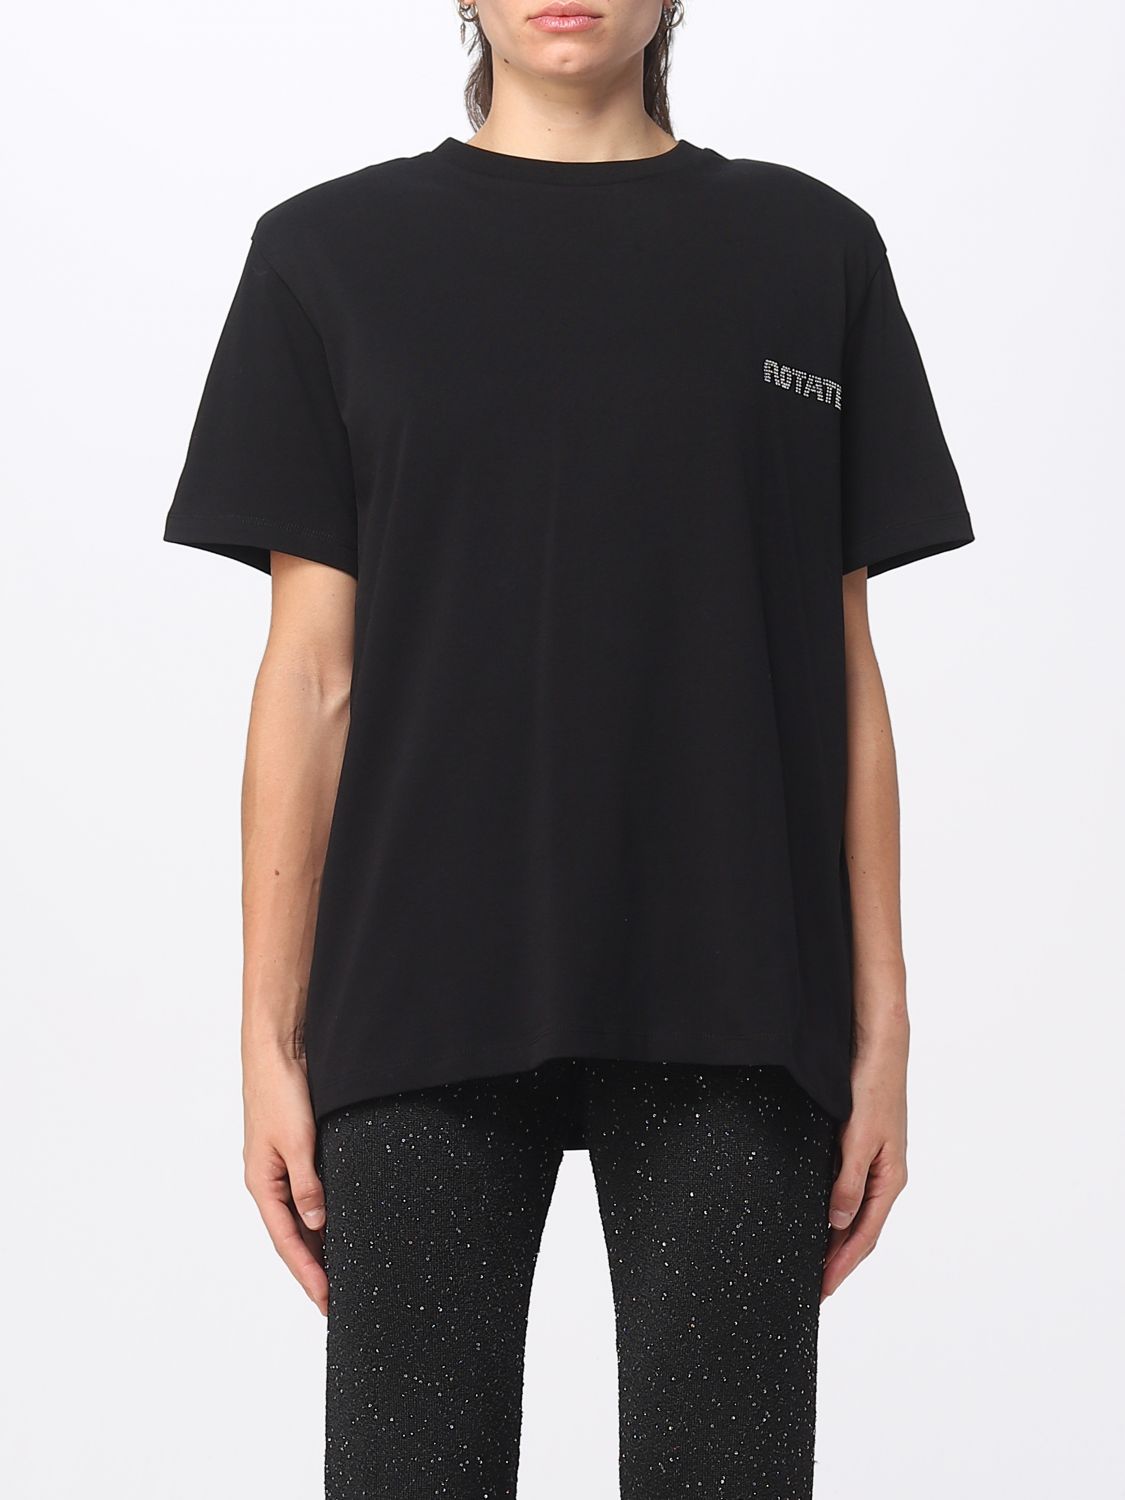 for ROTATE: at | Rotate online t-shirt Black - 111212100 woman t-shirt